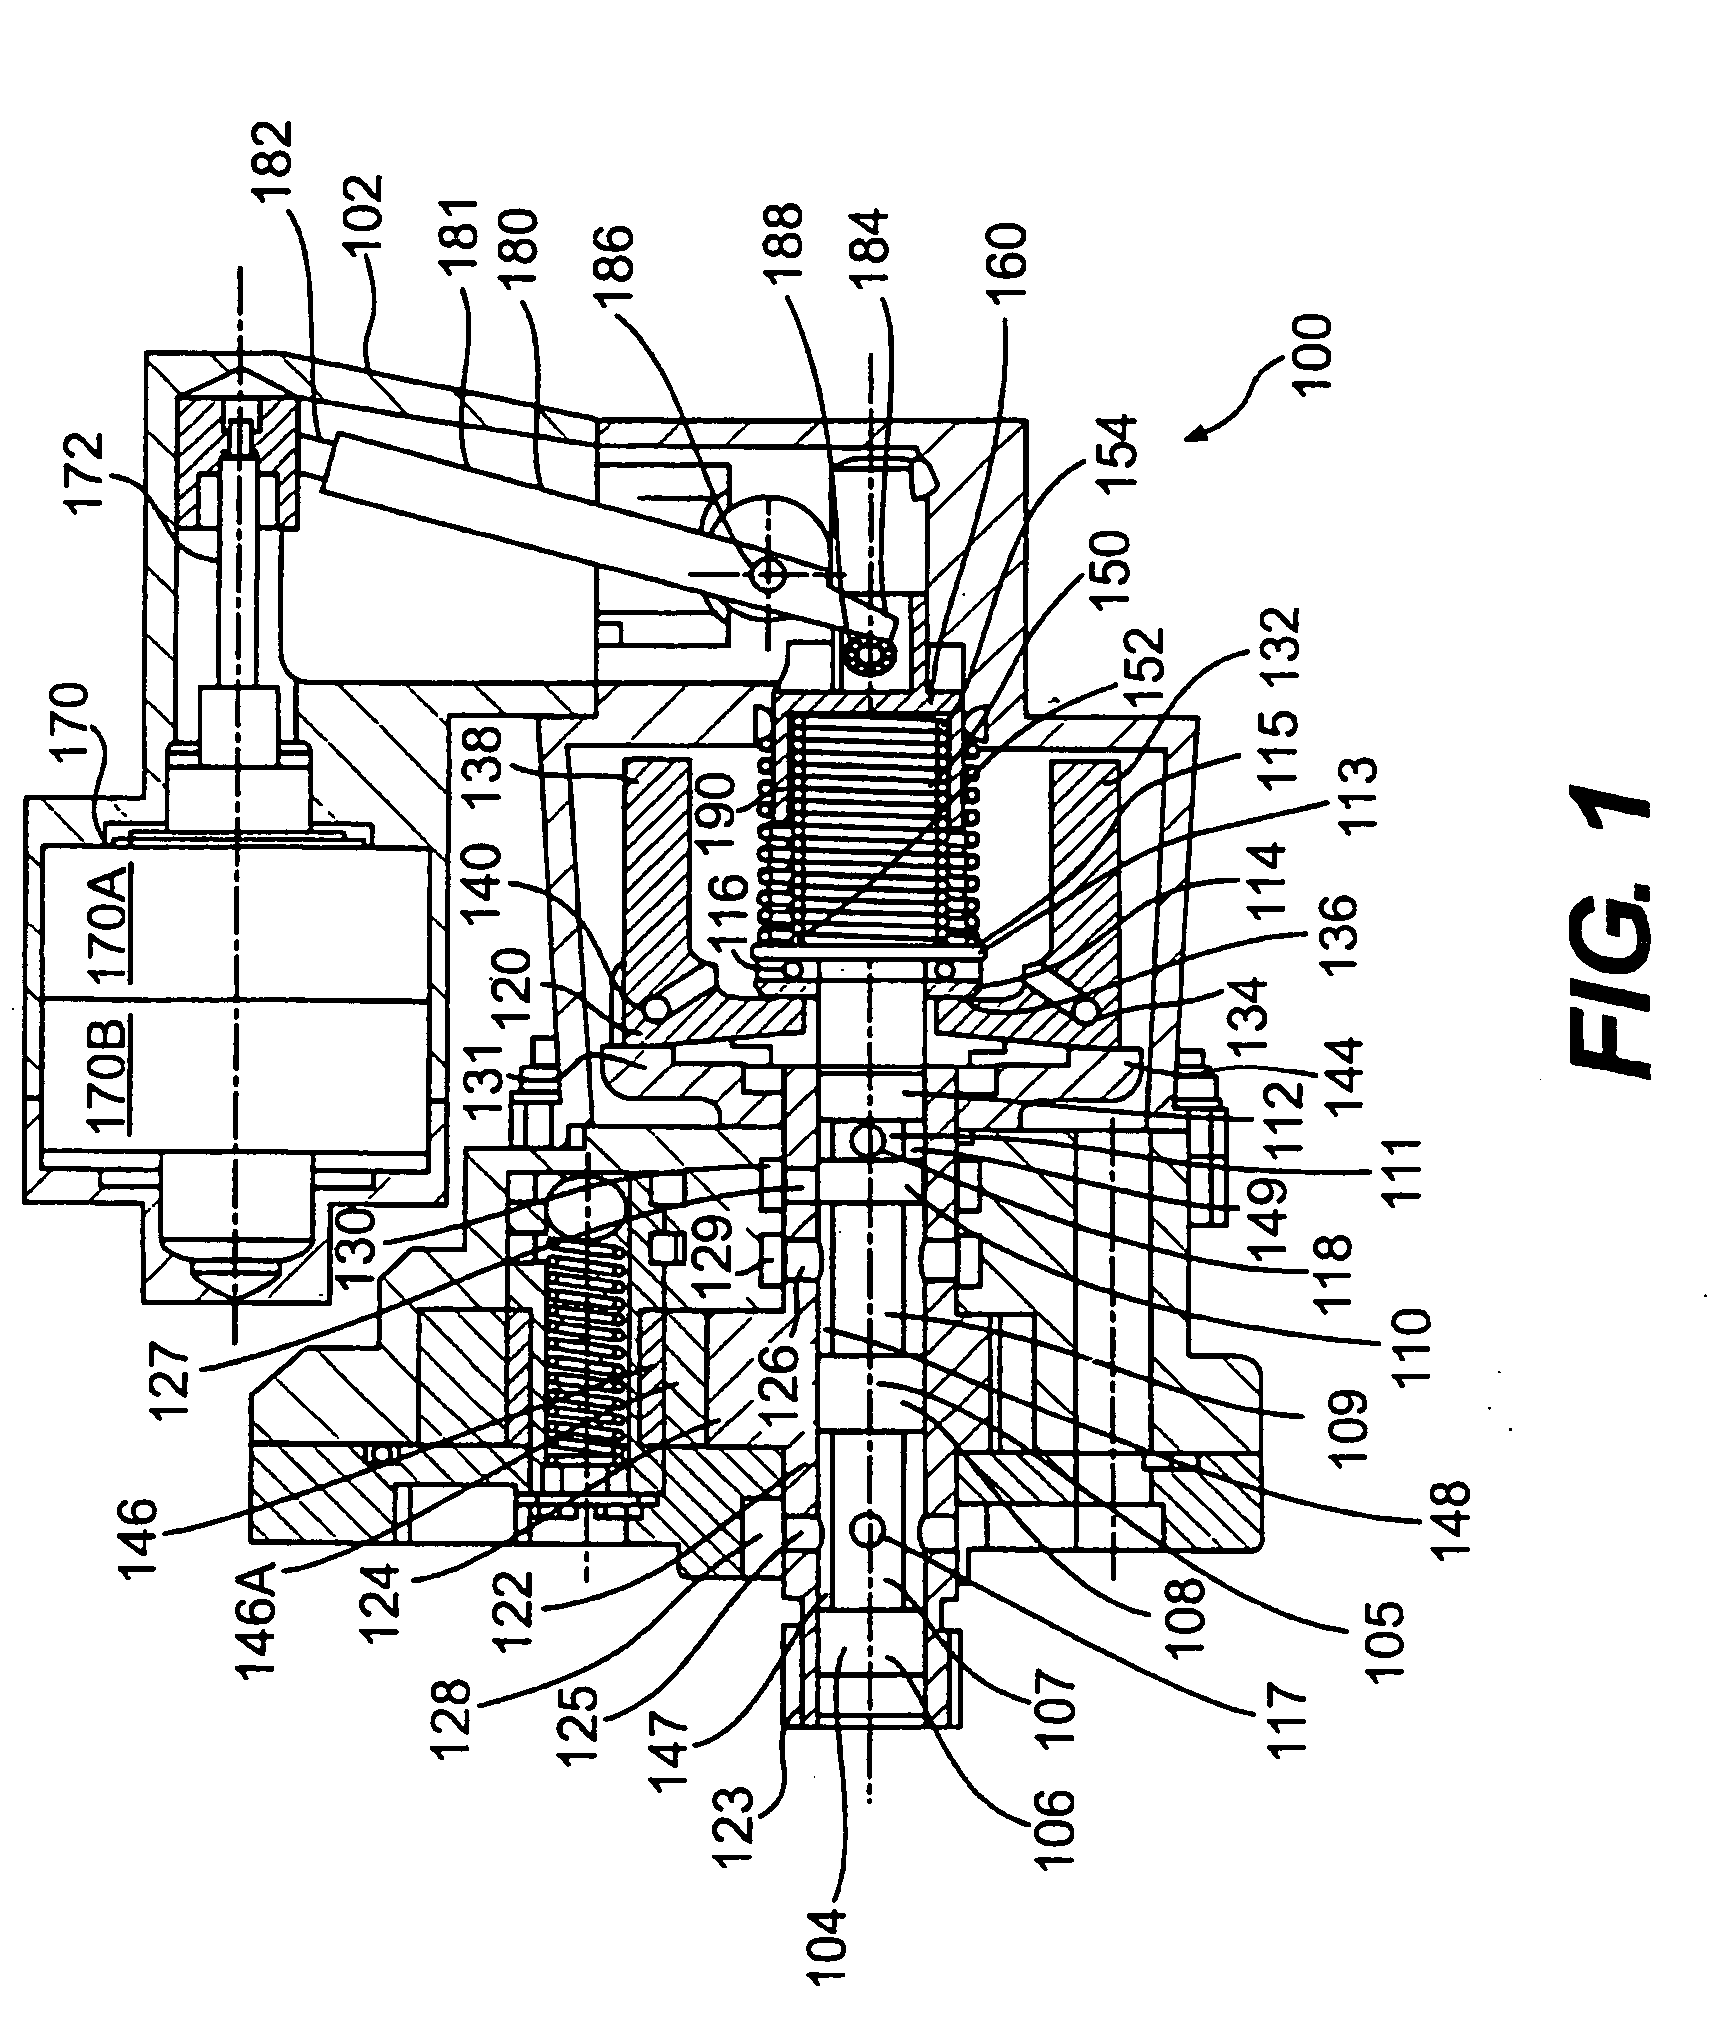 Turbocharger control system and propeller control system by a motor